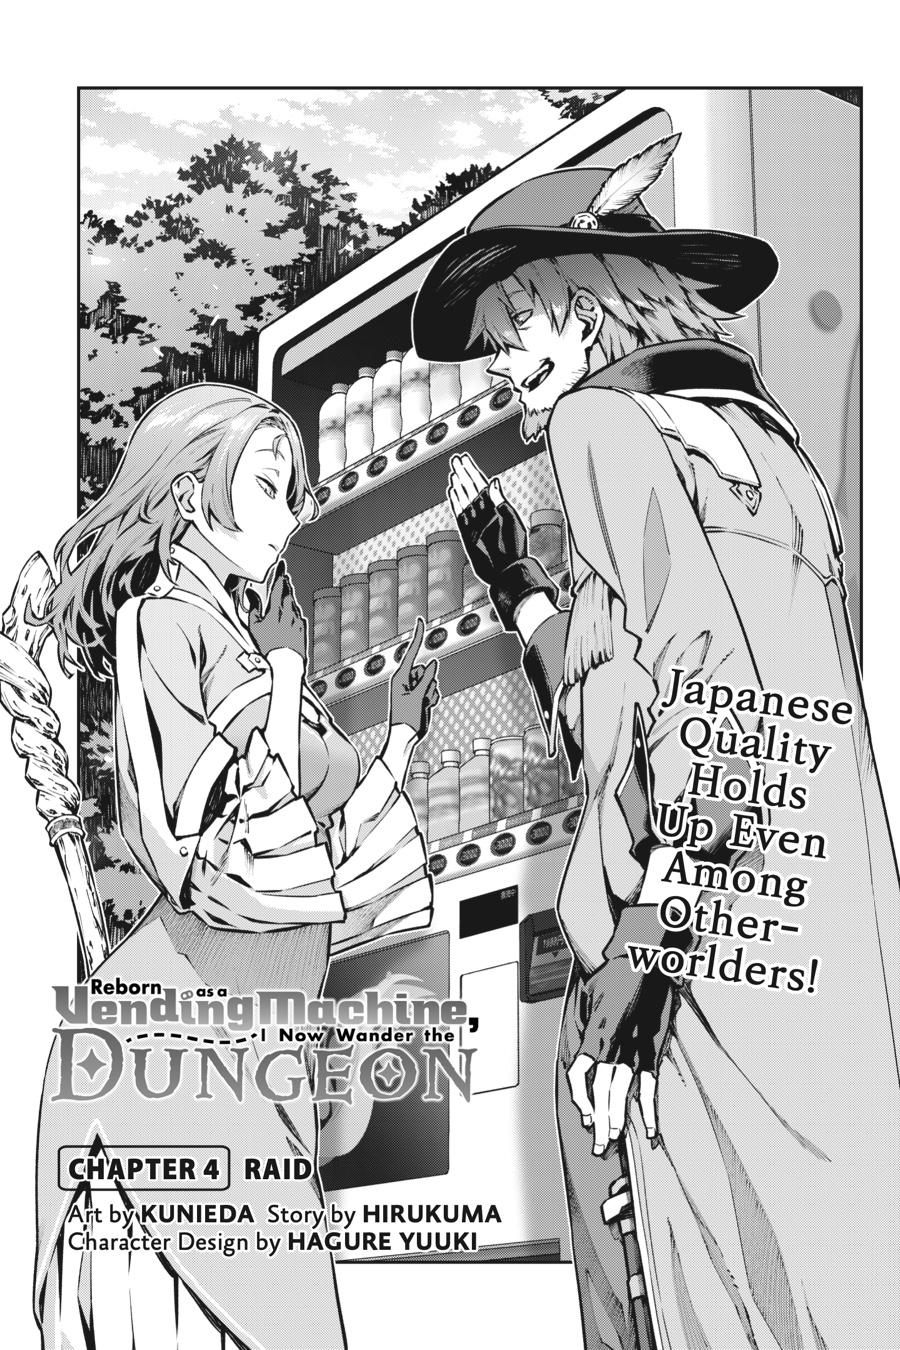 Reborn As A Vending Machine, I Now Wander The Dungeon Chapter 4 #2